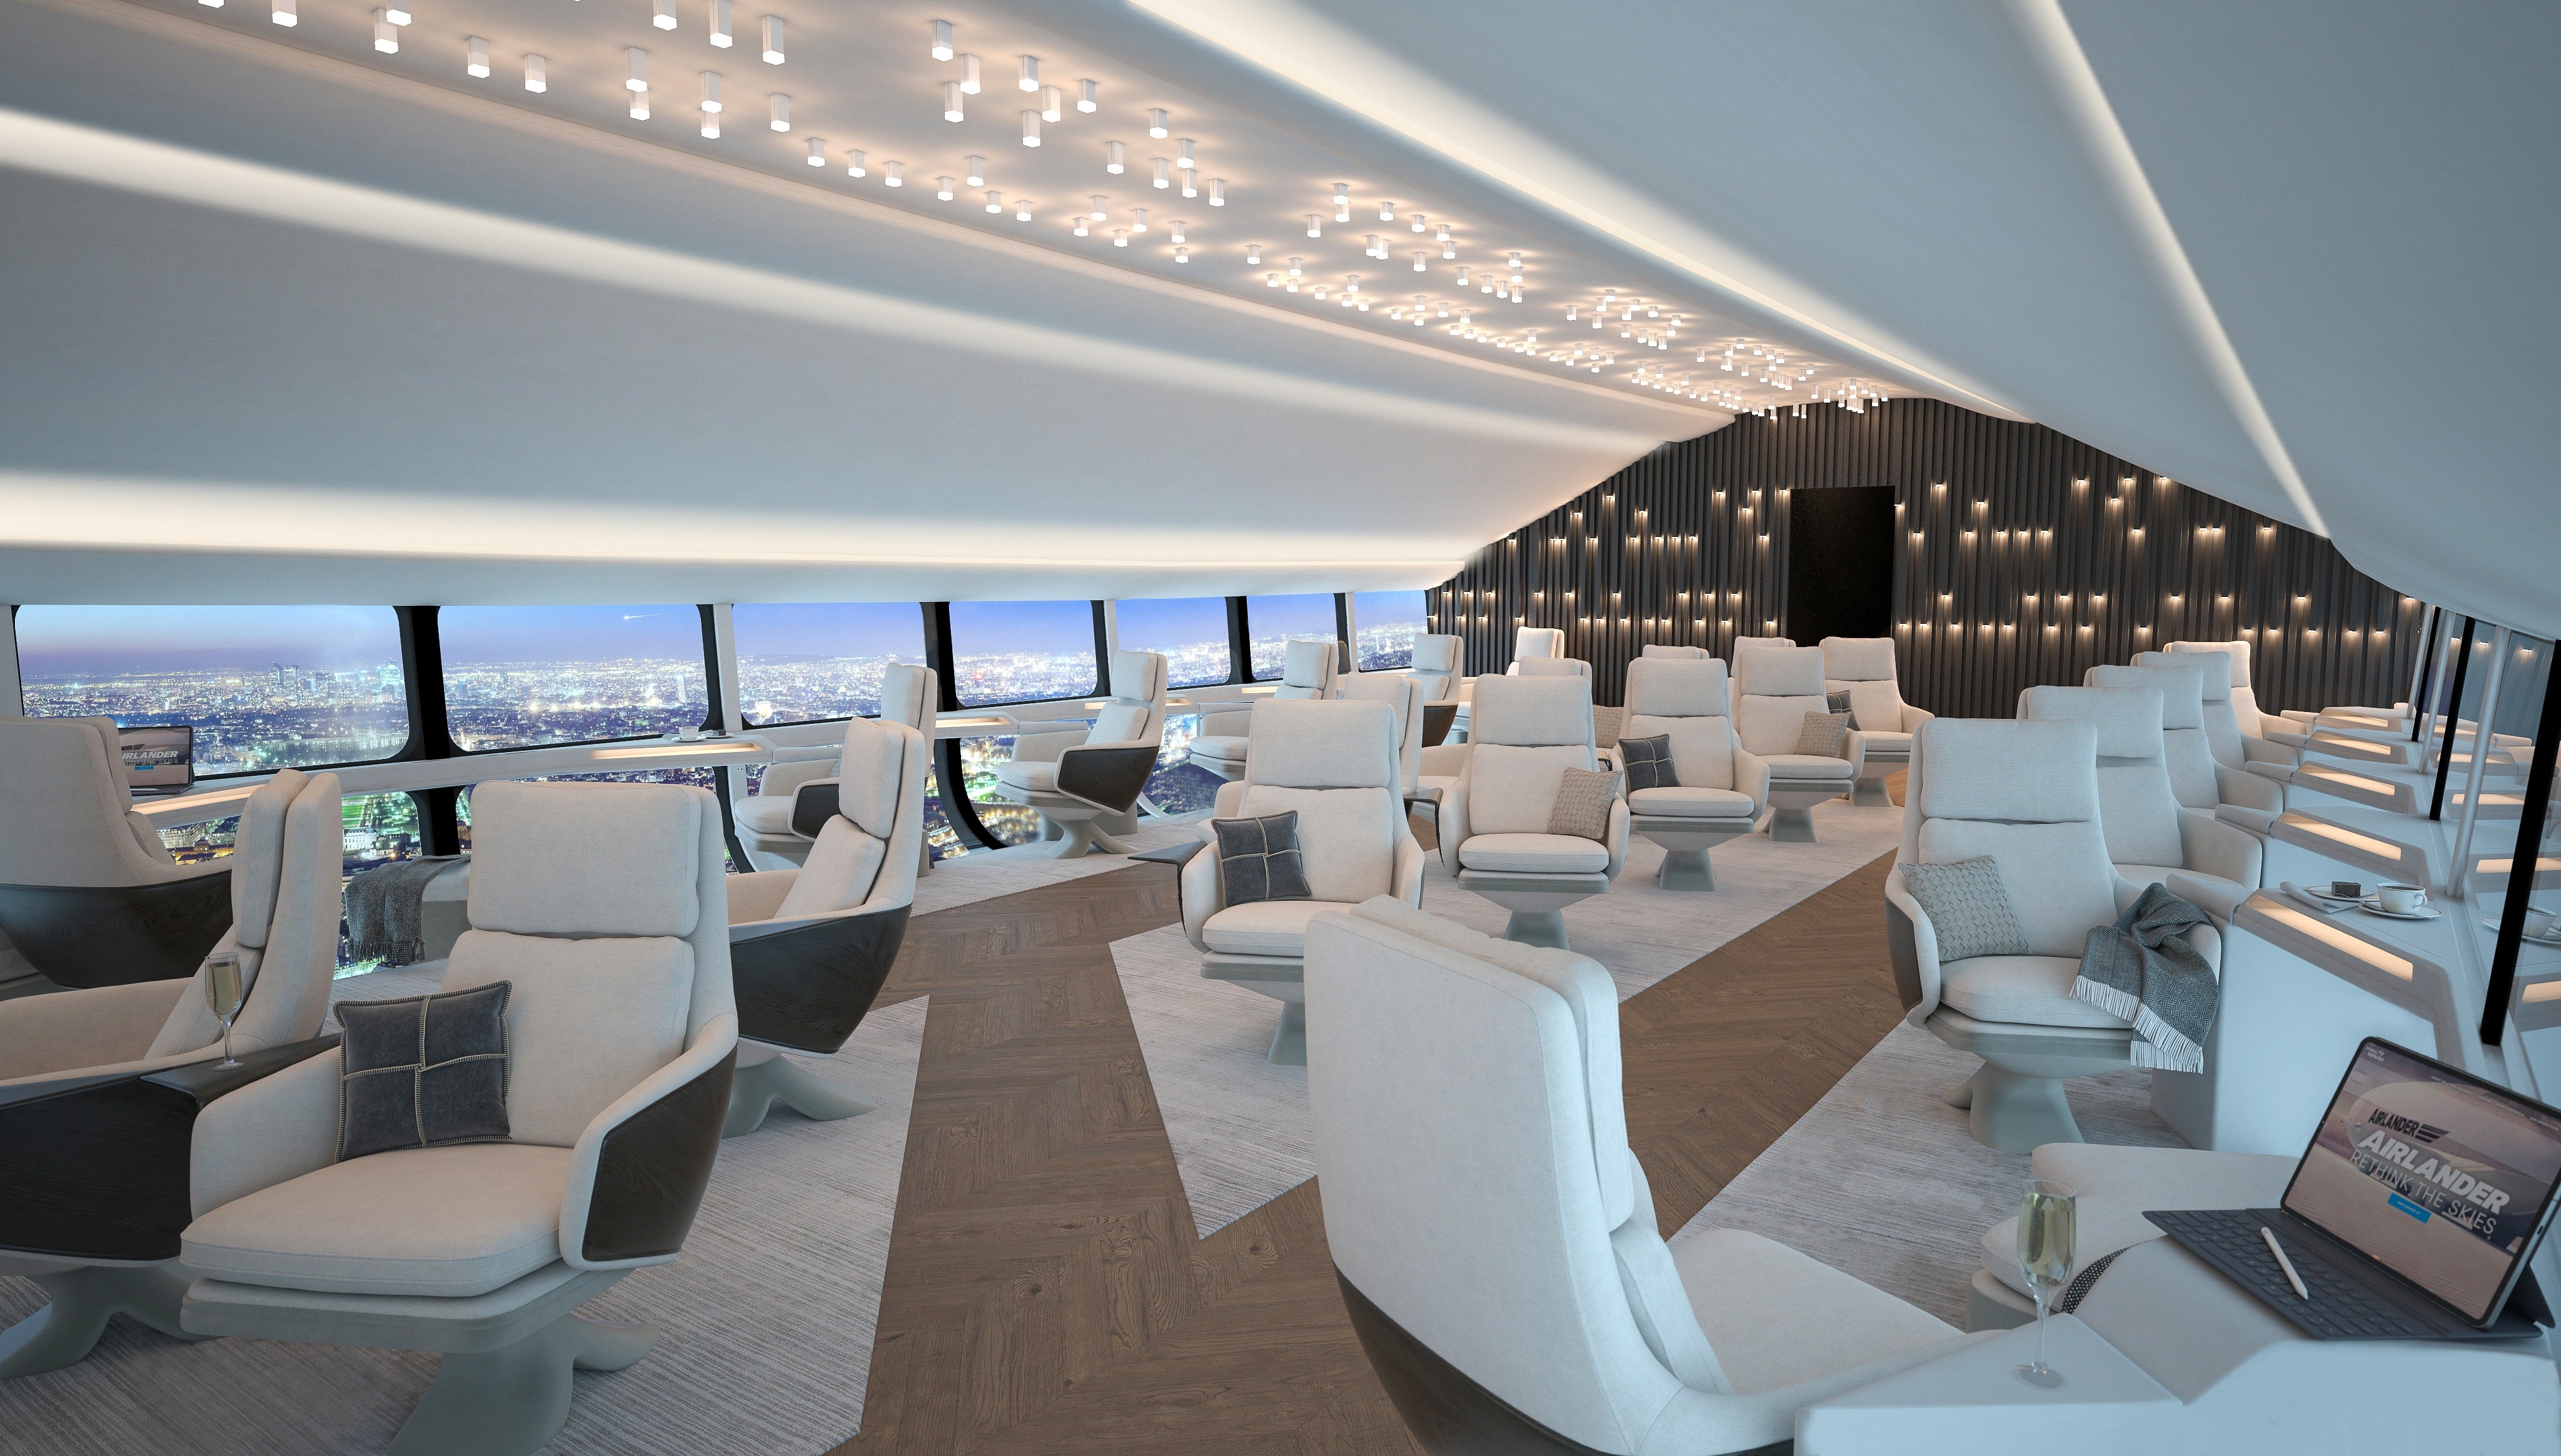 Airlander 10 interiors bring luxury lounging to the cabin